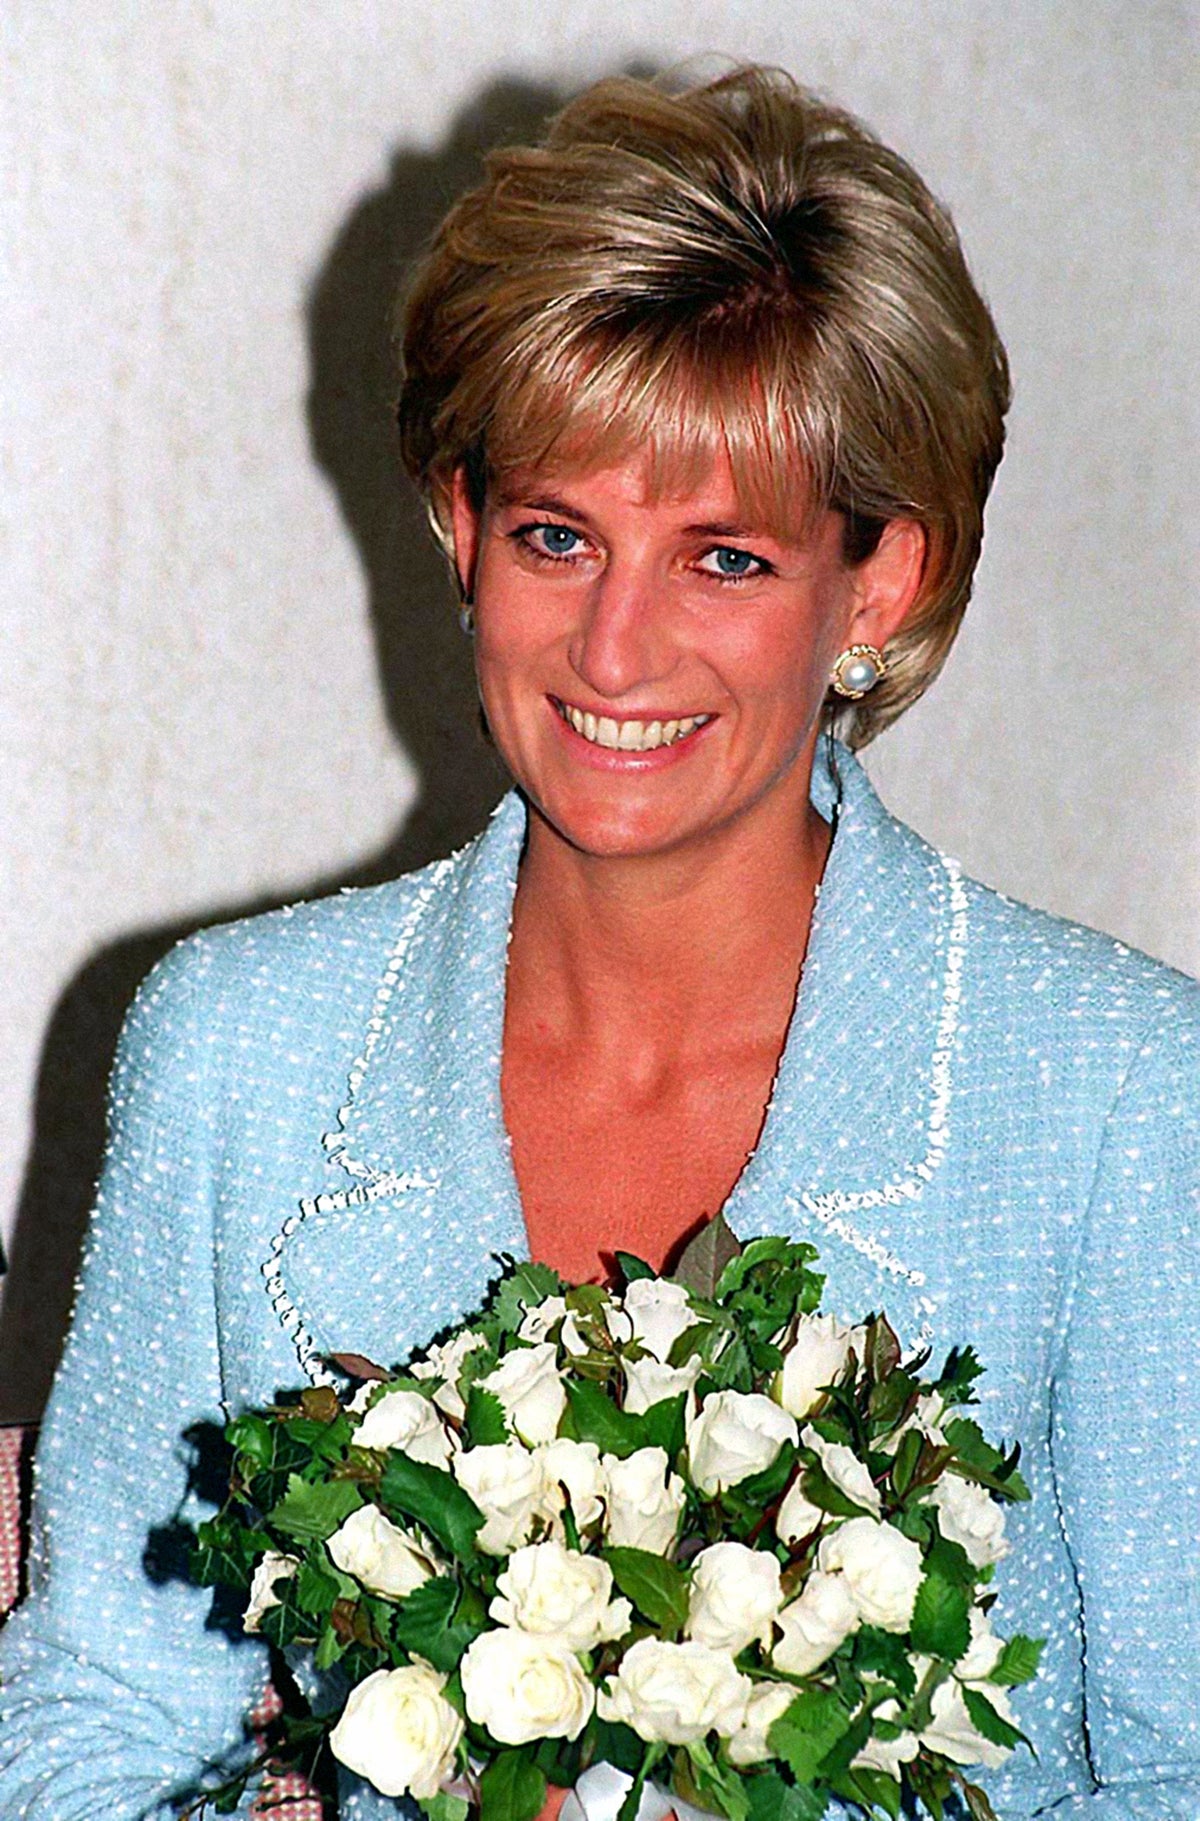 Key dates in the life of Diana, Princess of Wales